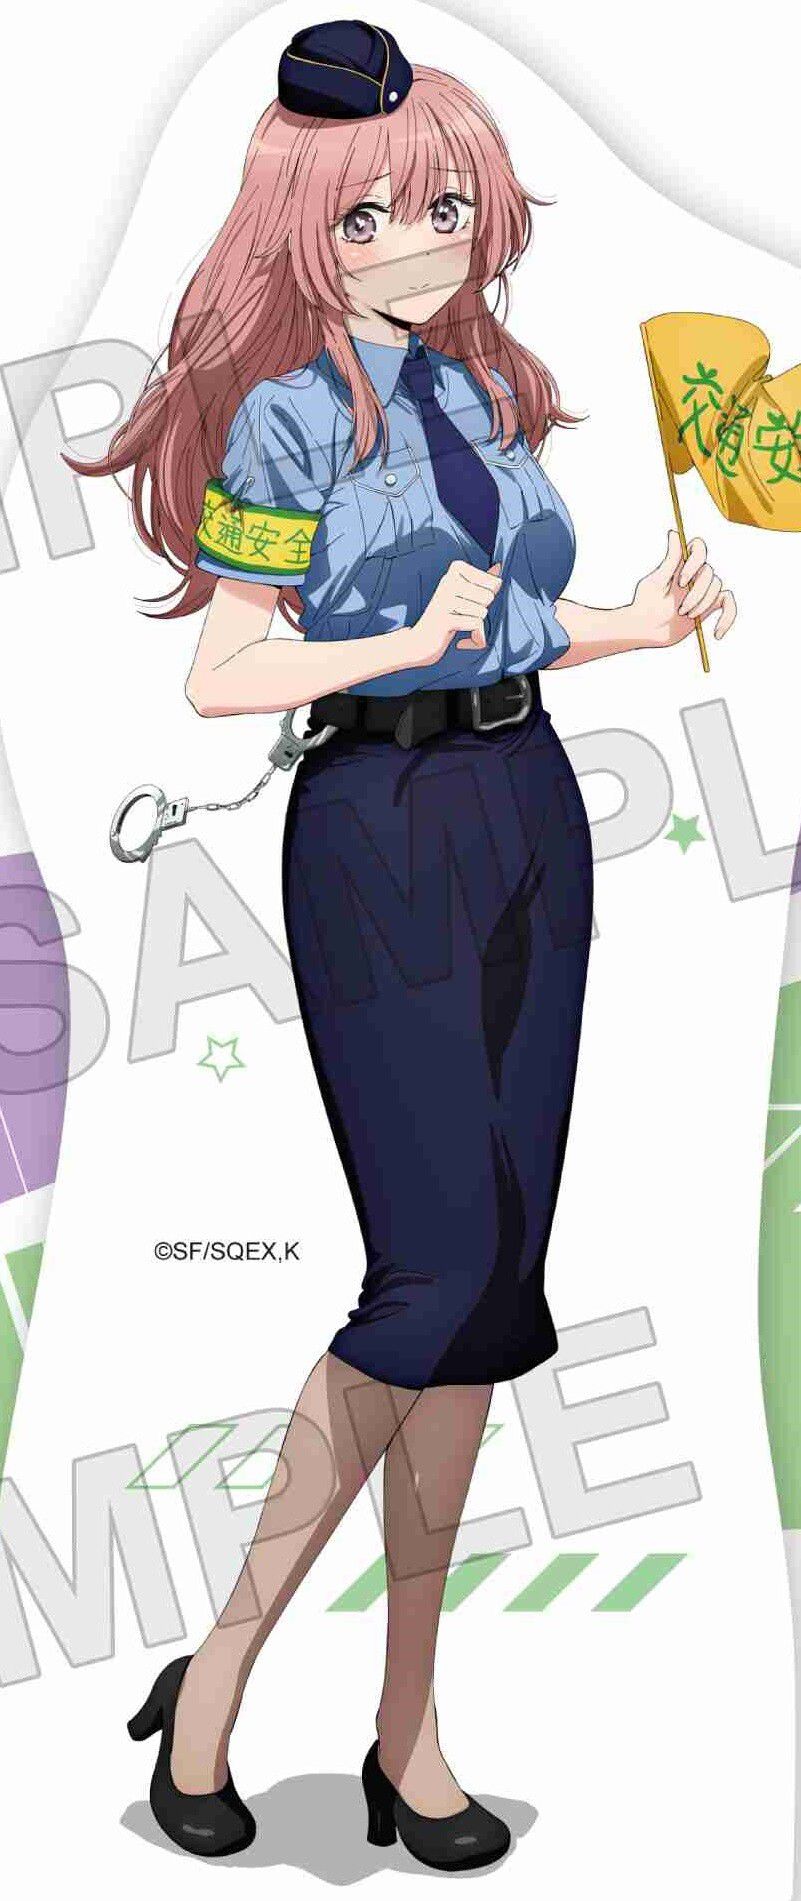 The dress-up doll falls in love Erotic illustration goods of lewd police officer cosplay of erotic 15